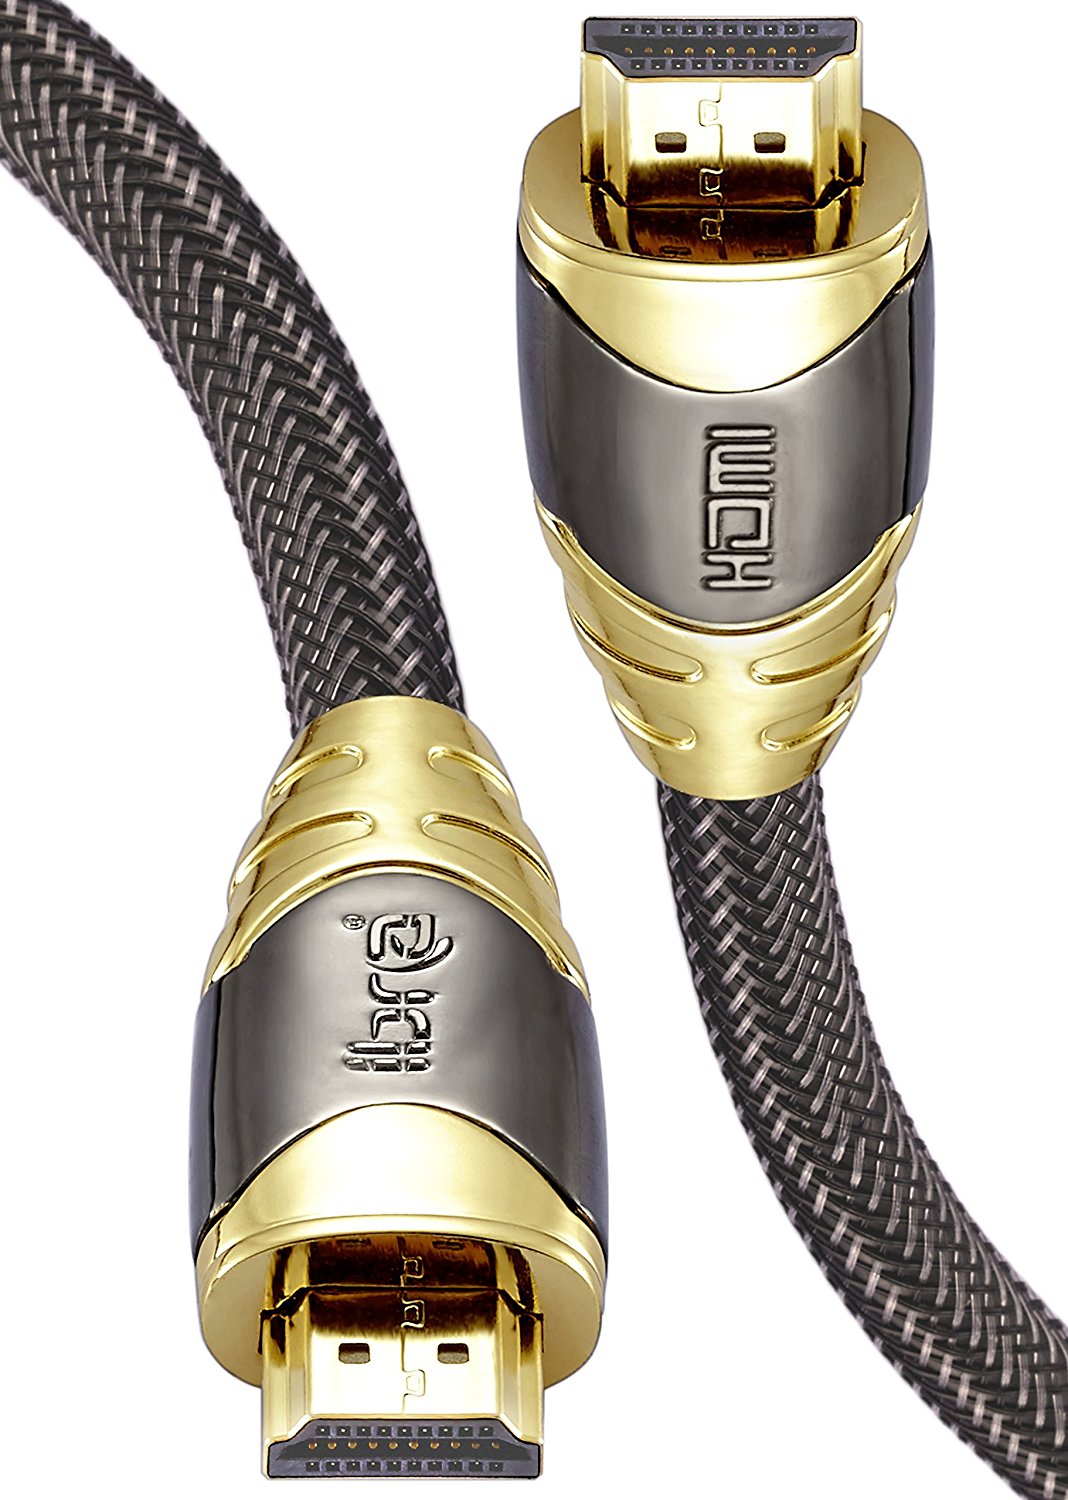 HDMI Cable 2M - HDMI 2.0 (4K@60Hz) Ready - 28AWG Braided Cord - 18Gbps -Gold Plated Connectors - Ethernet, Audio Return - Video 4K 2160p HD 1080p 3D Xbox PlayStation PS3 PS4 PC Apple TV – IBRA LUXURY